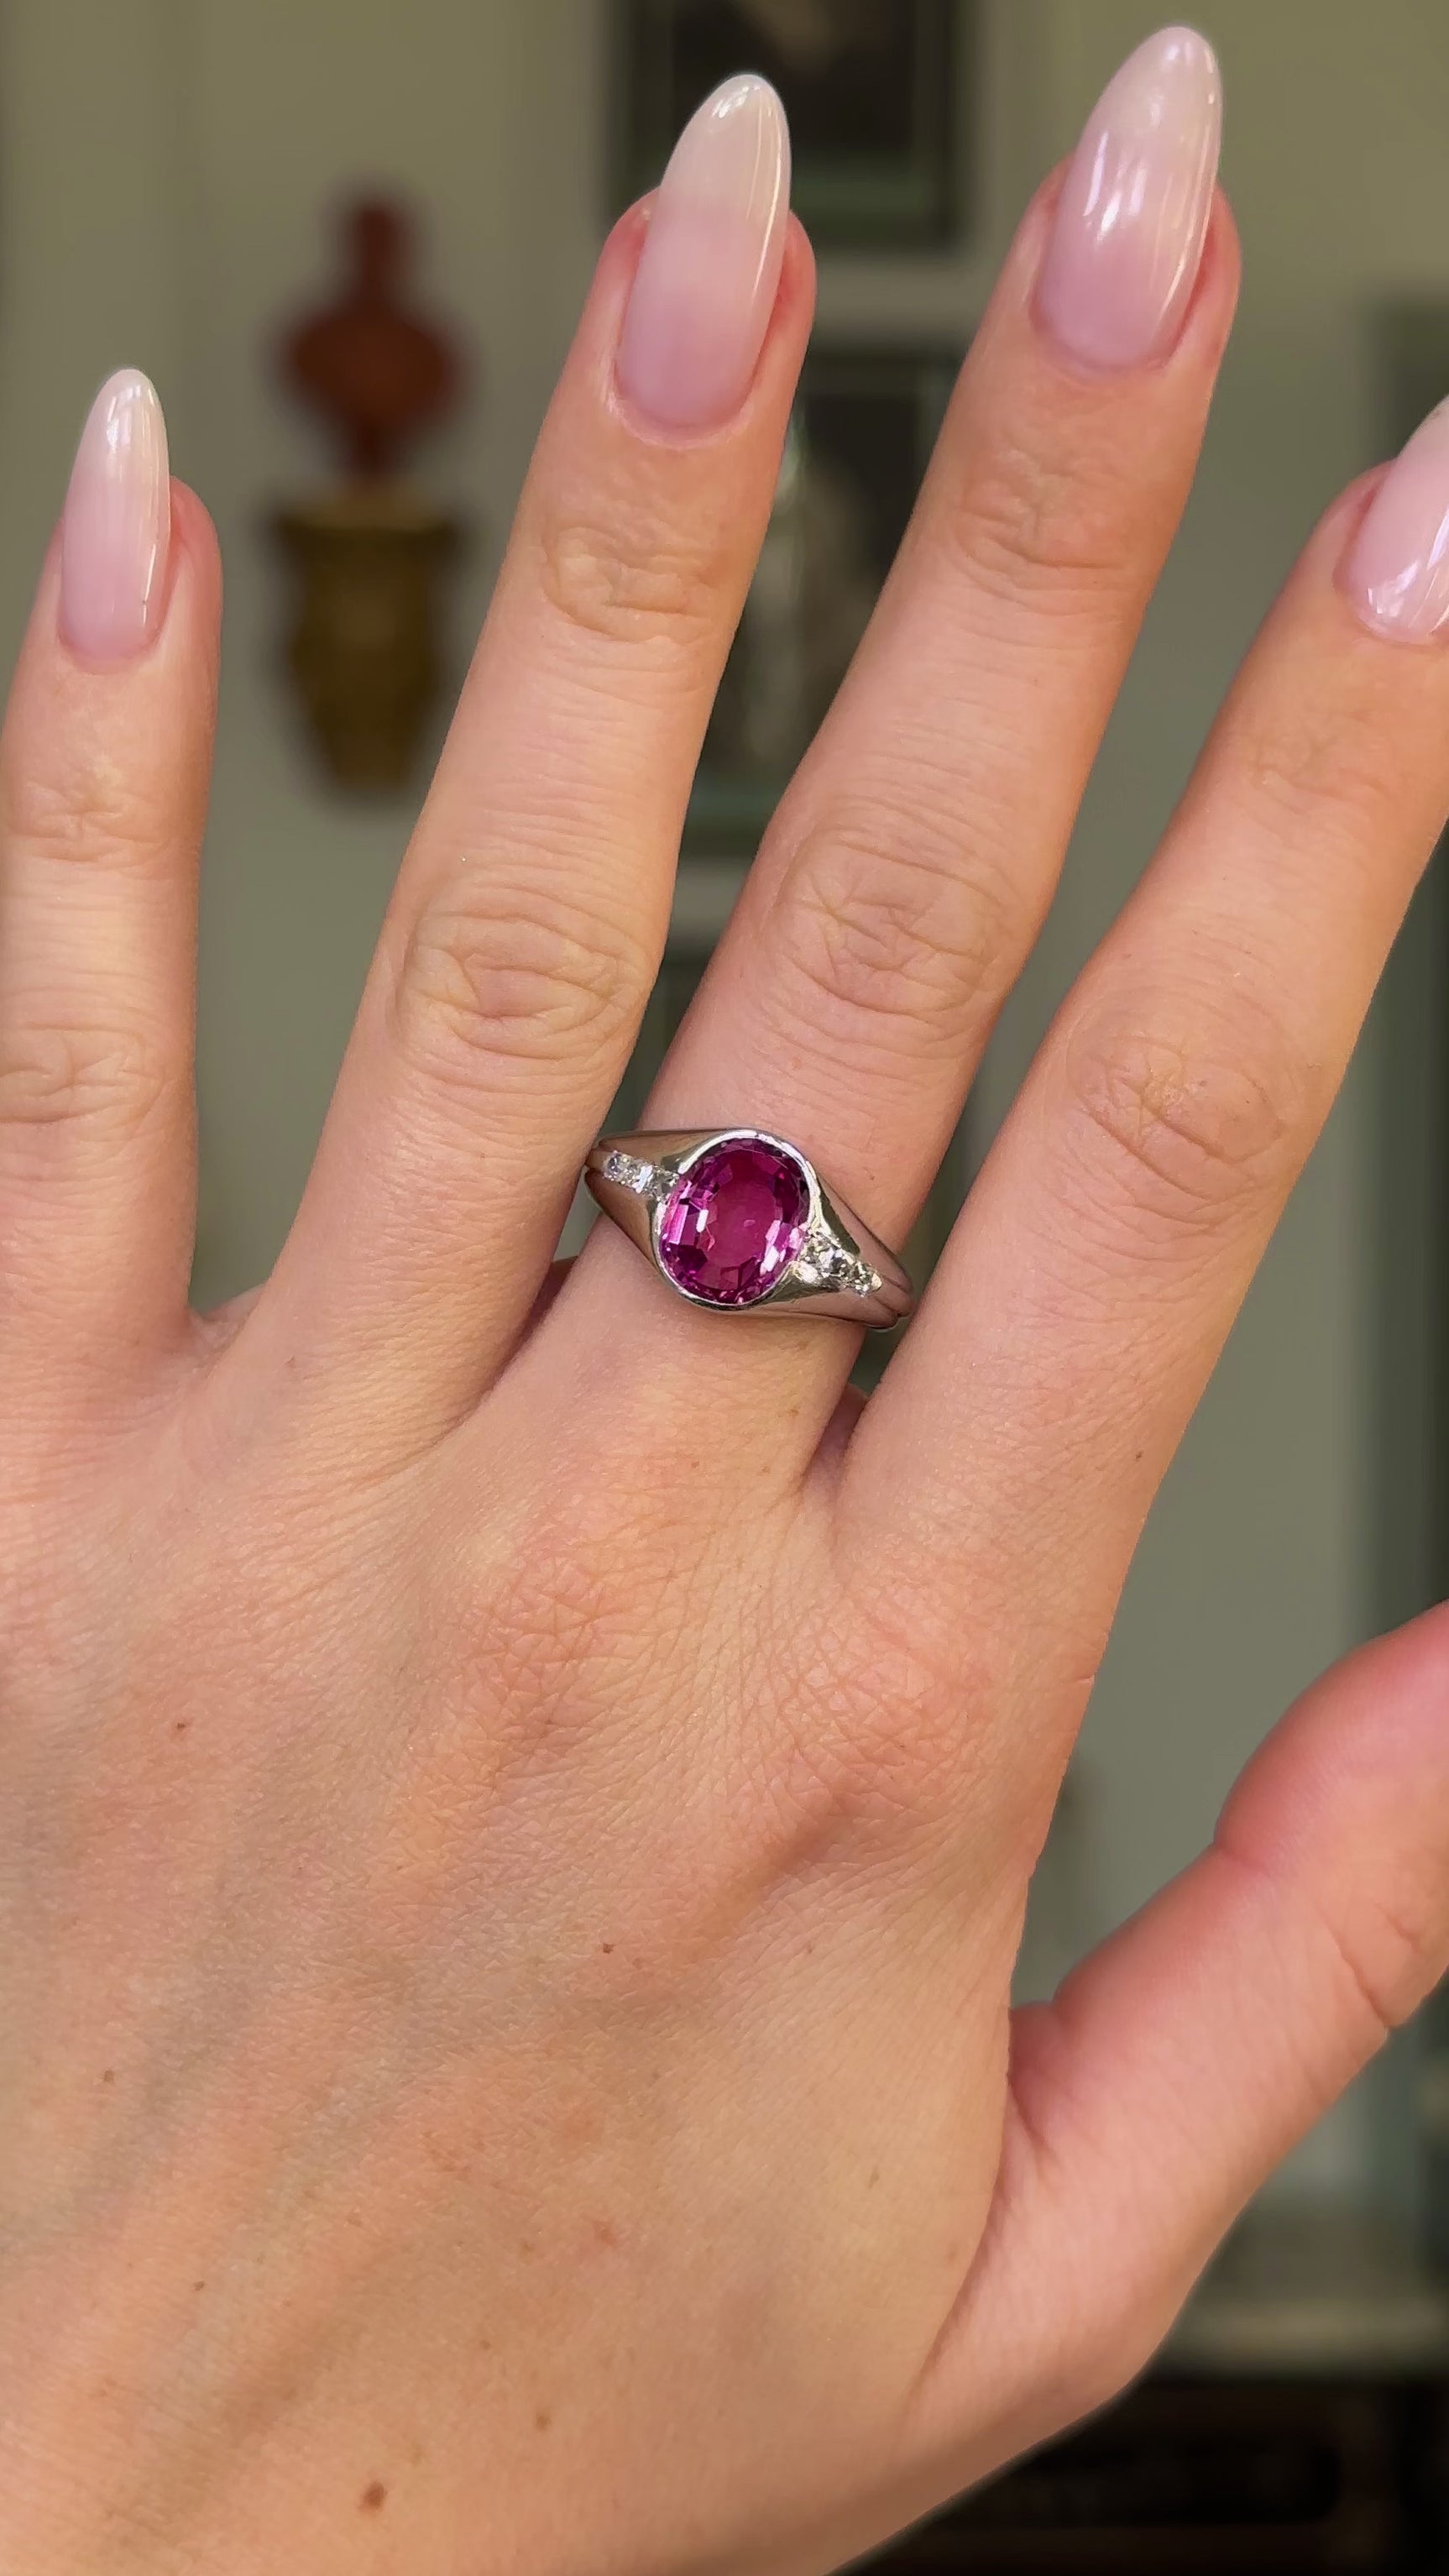 vintage pink sapphire, diamond and platinum ring worn on hand and moved around to give perspective.